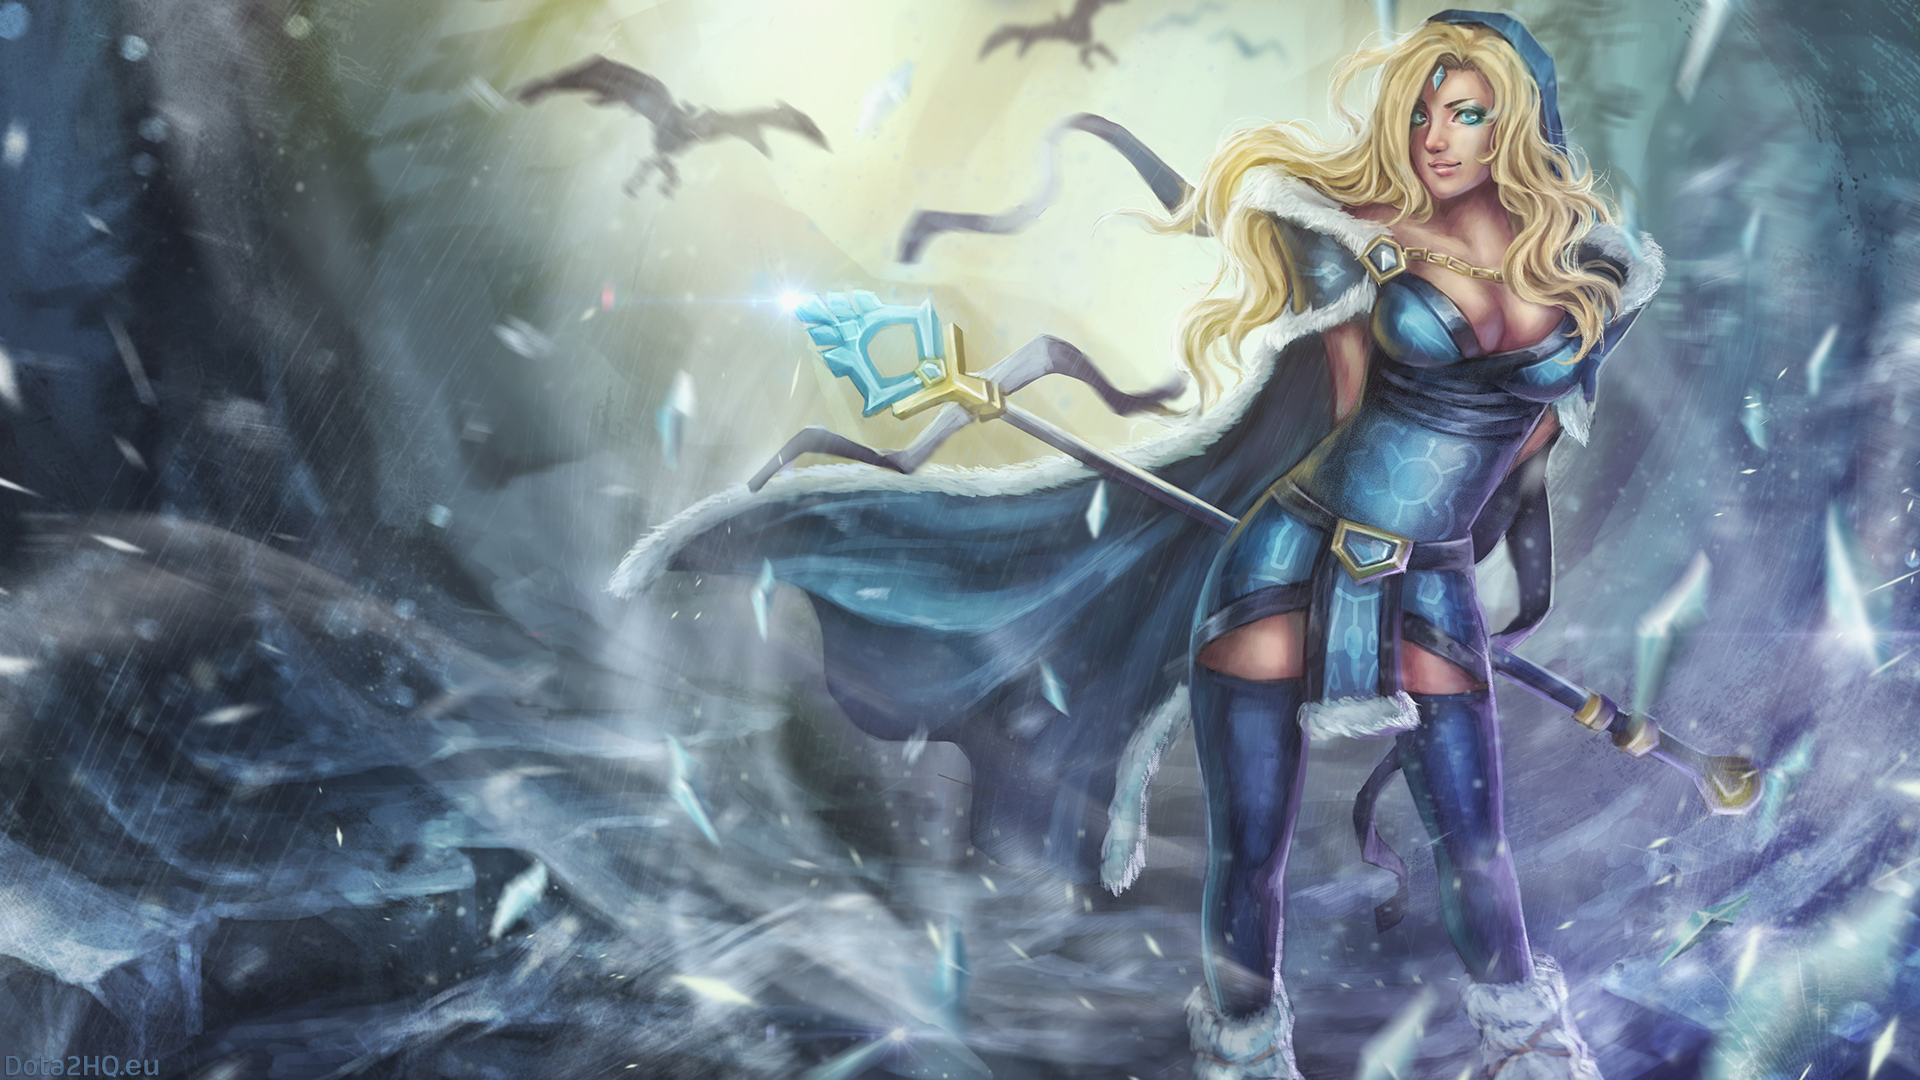 Heroes Are Illustrated On This Dota Wallpaper Crystal Maiden